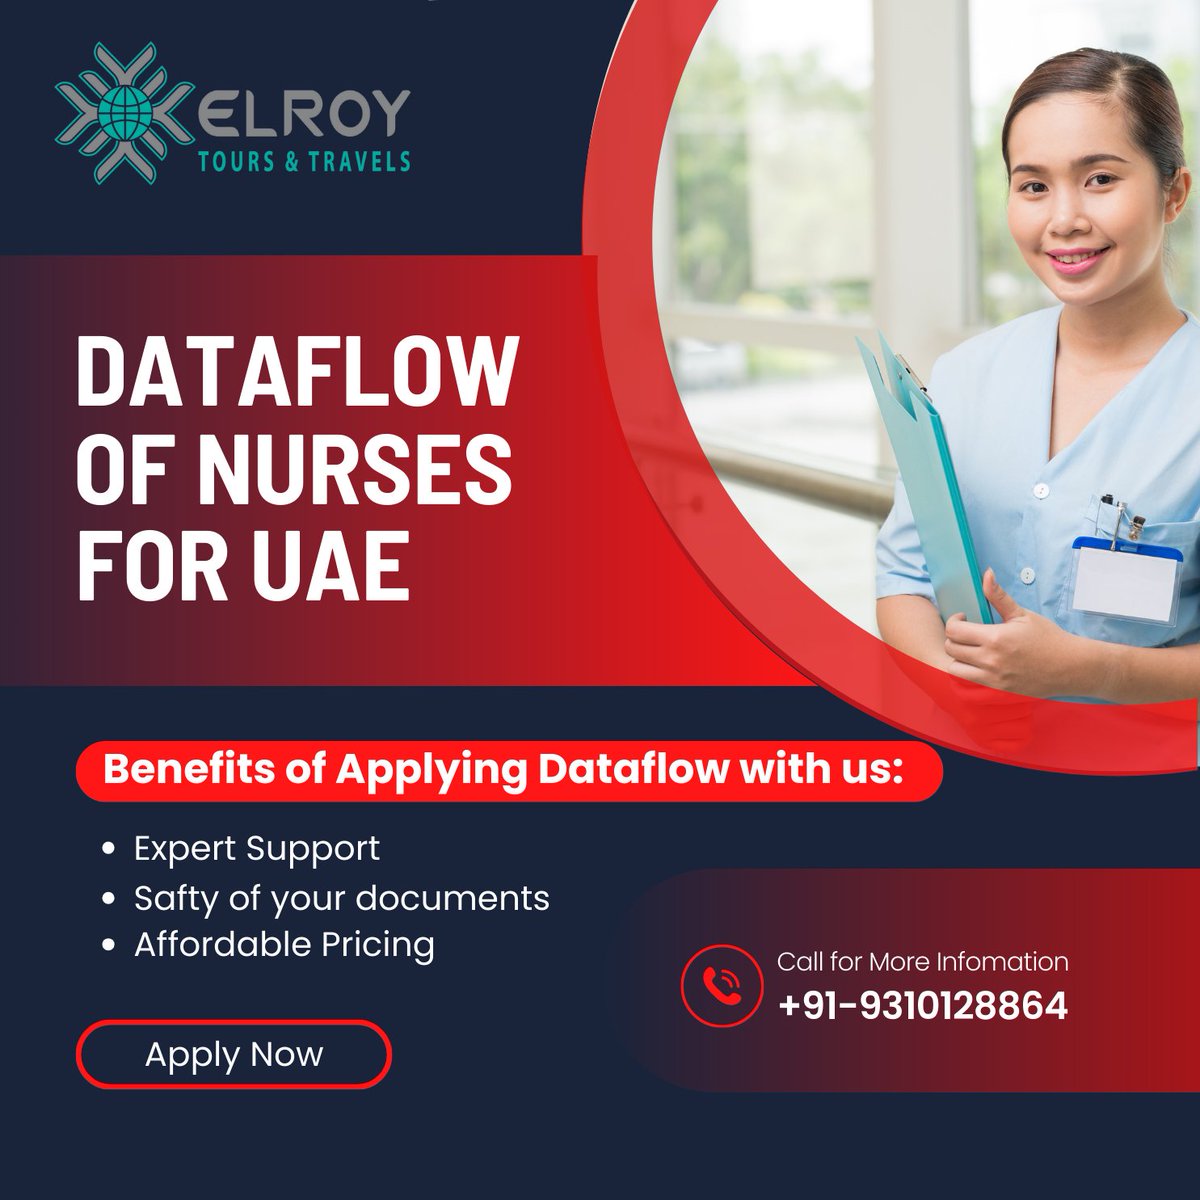 🌍 Ready to take your nursing career worldwide? Our agency offers expert Dataflow Assistance for Nurses headed to Kuwait and UAE. Let us handle the paperwork while you focus on saving lives! #NurseJobs #InternationalNursing #Kuwait #UAE